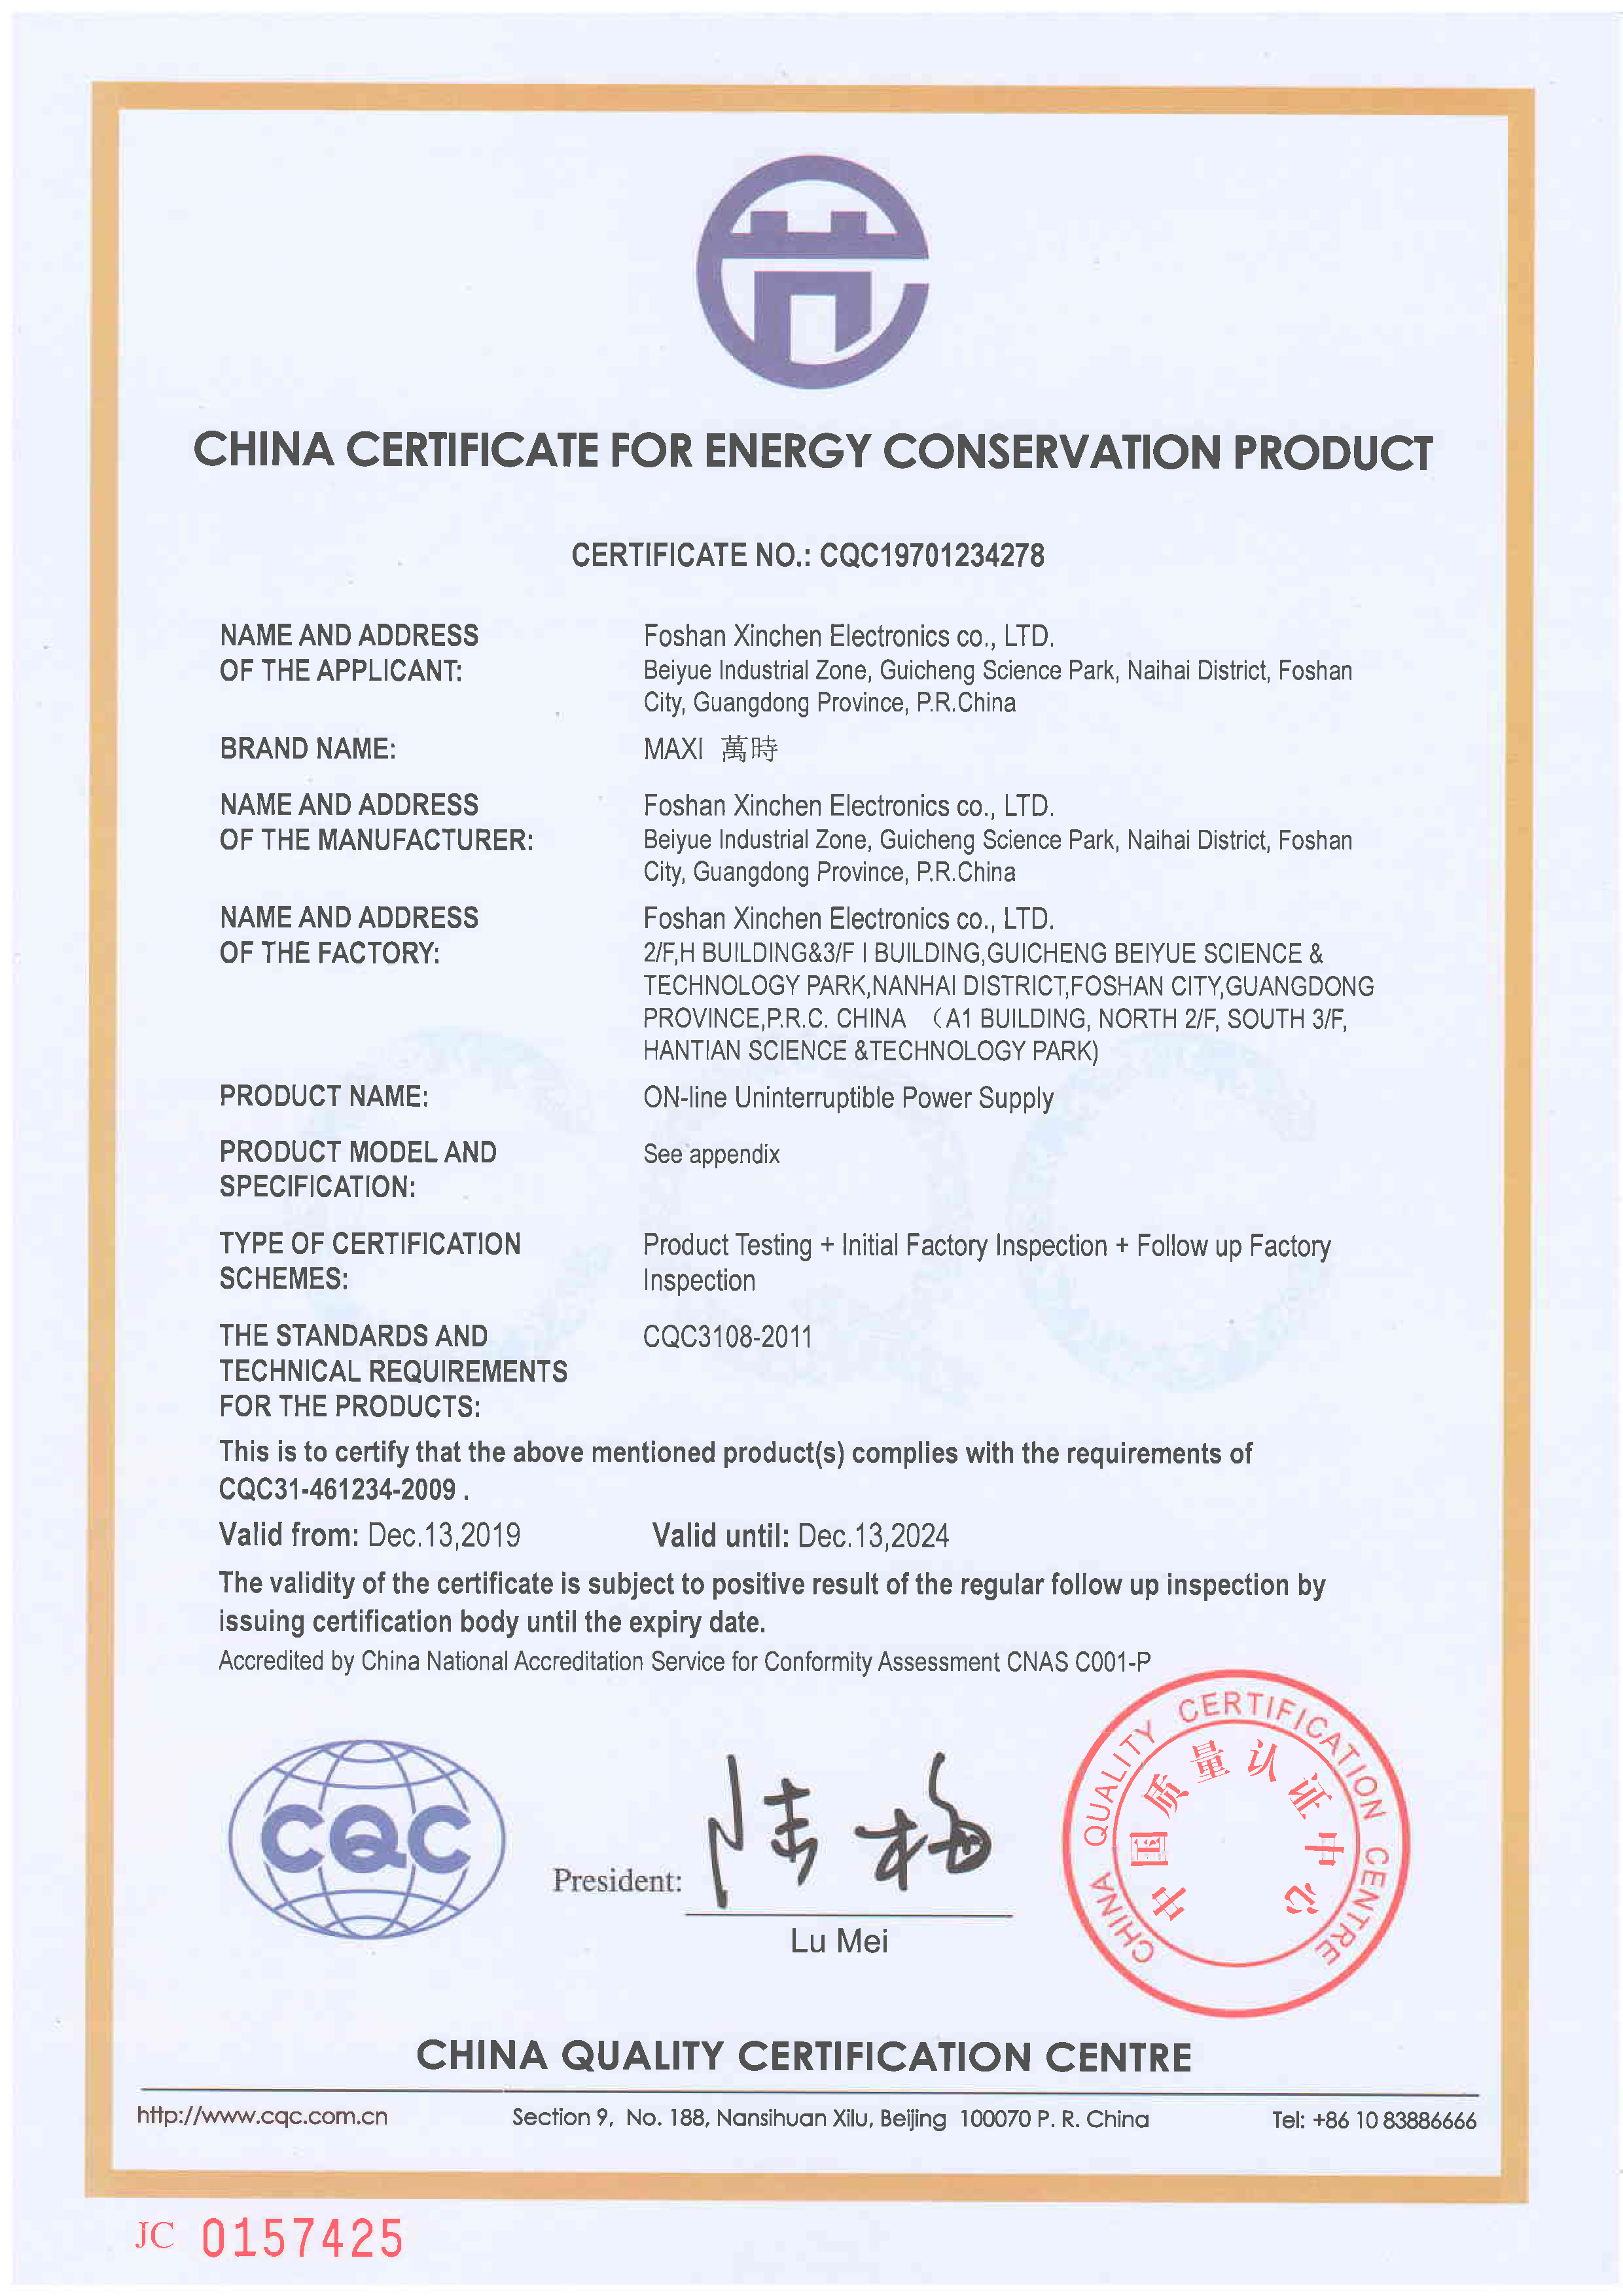 China Ceriticate For Energy Conservation Product